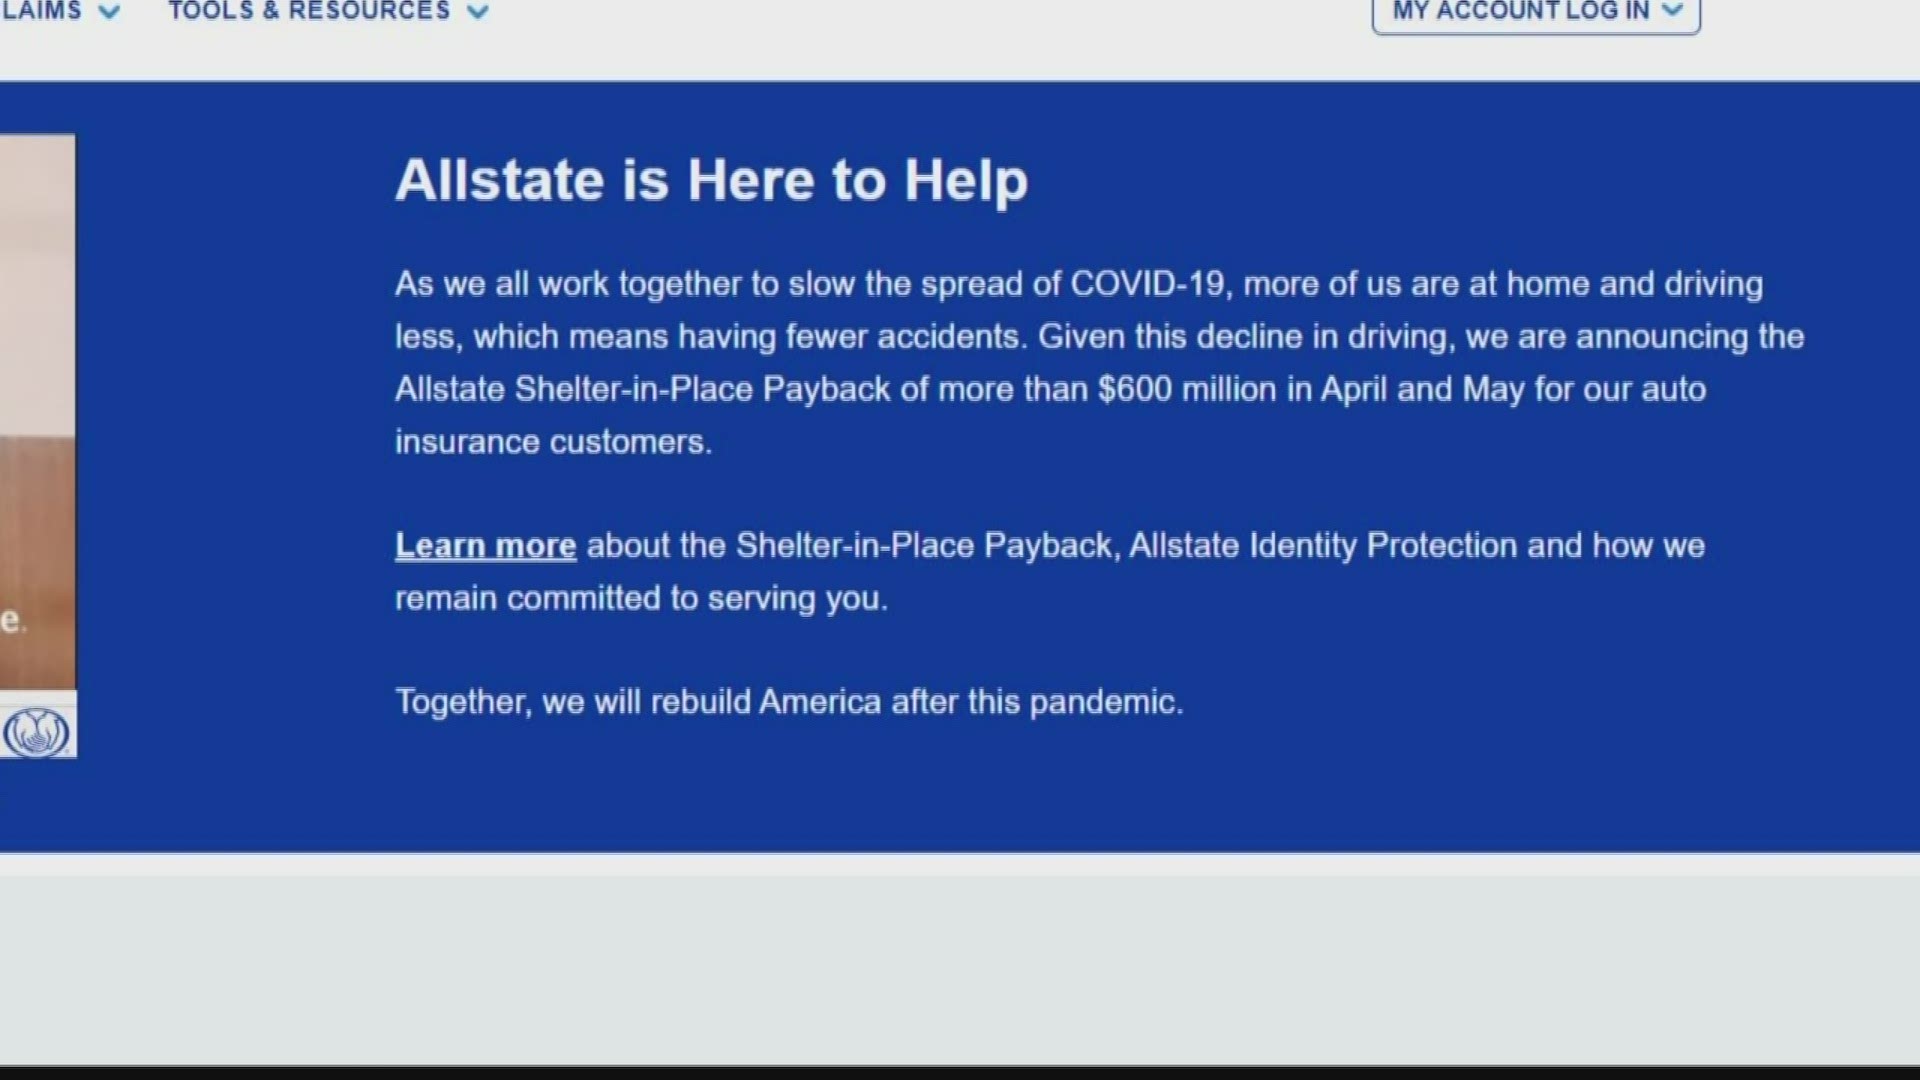 Allstate is providing a Shelter-in-Place Payback, payment relief and extended coverage to help customers get through the COVID-19 coronavirus pandemic.